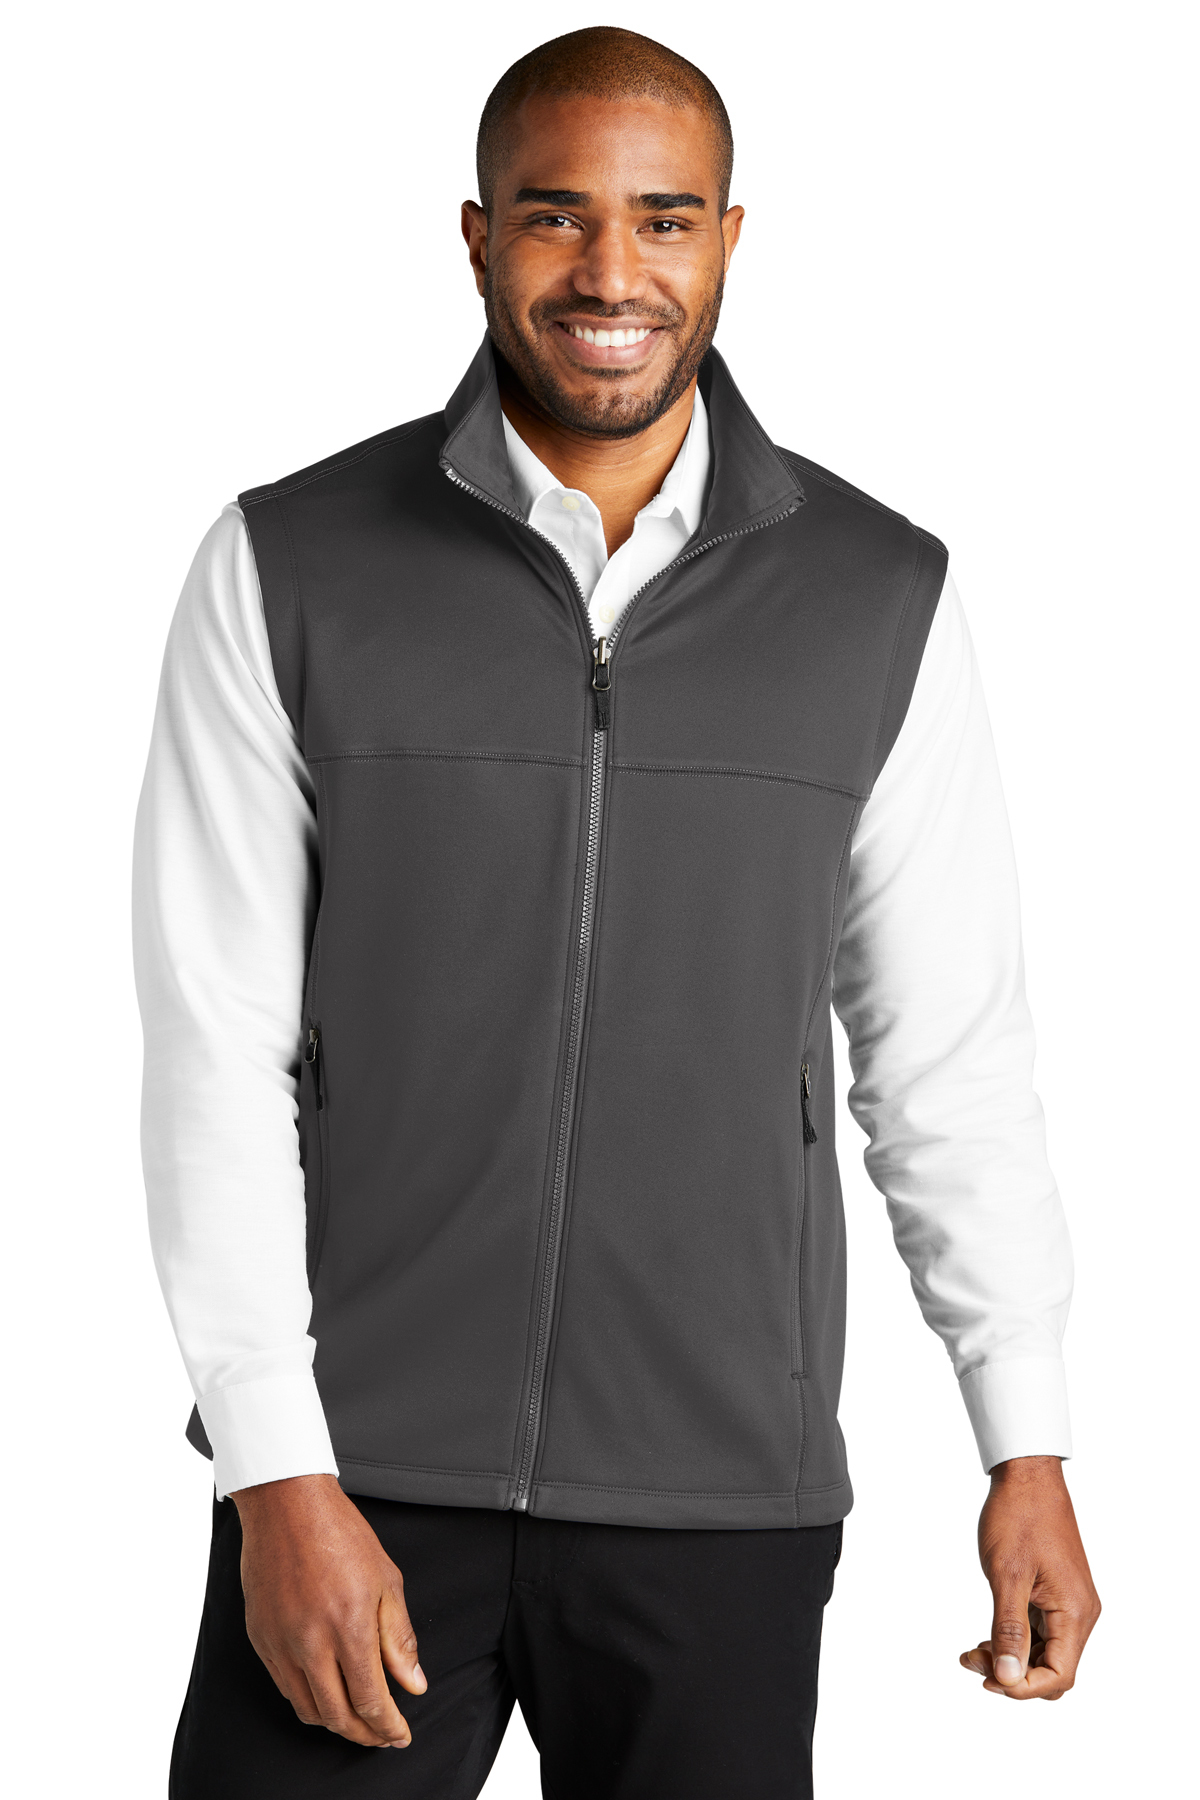 Omgaan Rijp moord Port Authority Collective Smooth Fleece Vest | Product | Port Authority